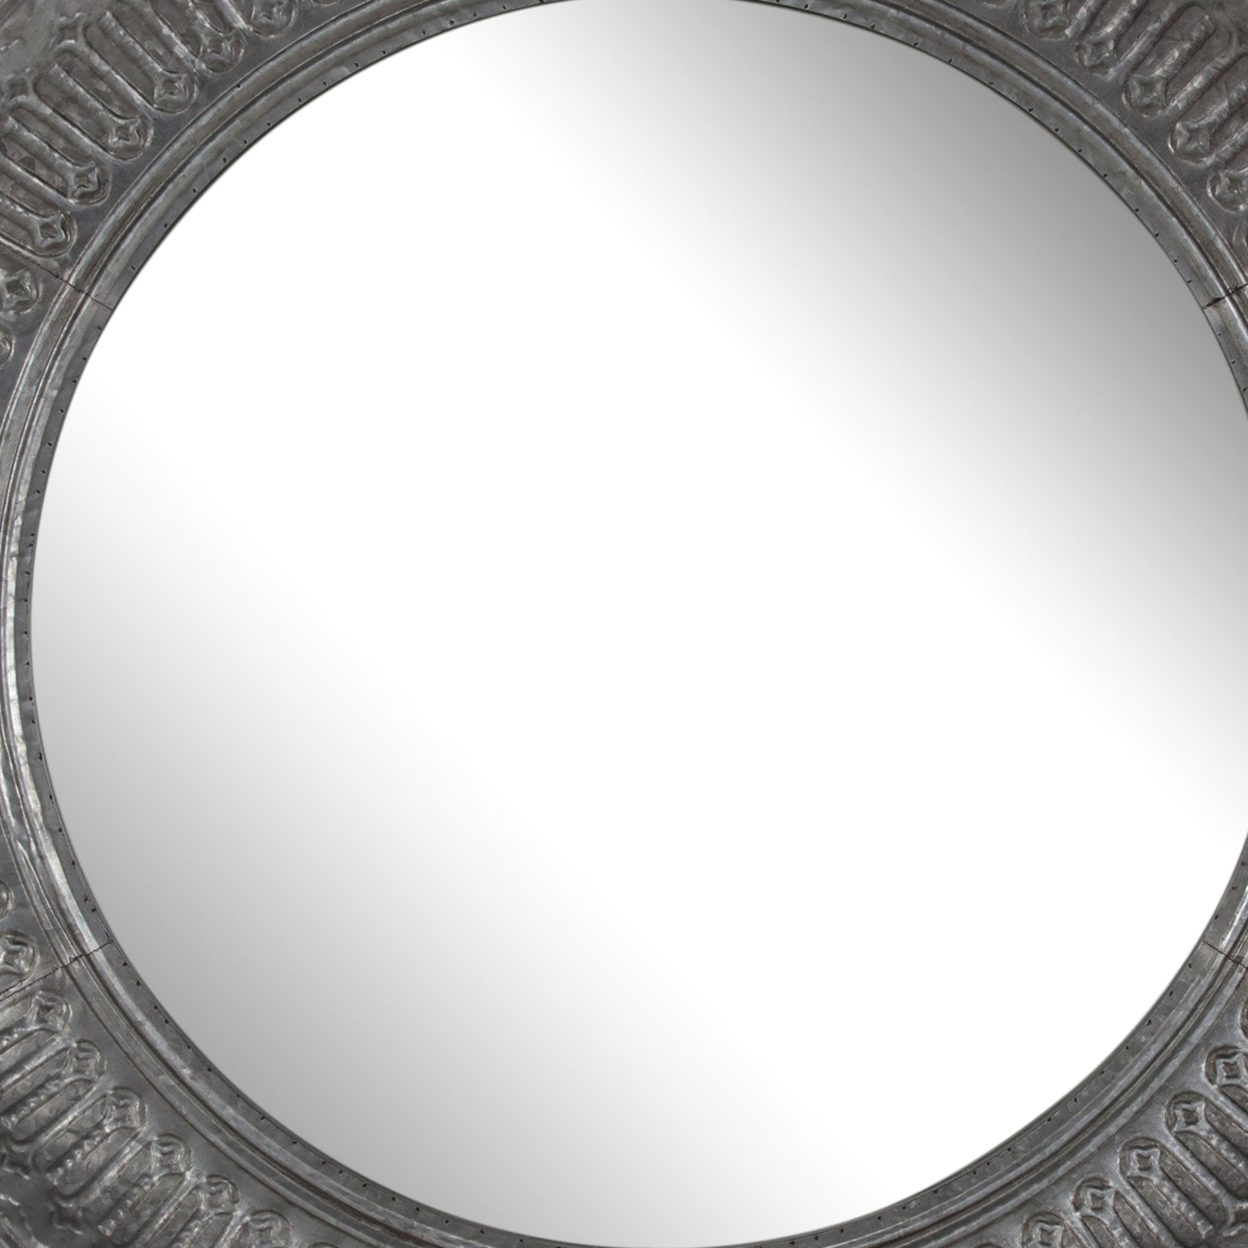 Round Wall Mirror With Thick Embossed Metal Border, Antique Gray- Saltoro Sherpi